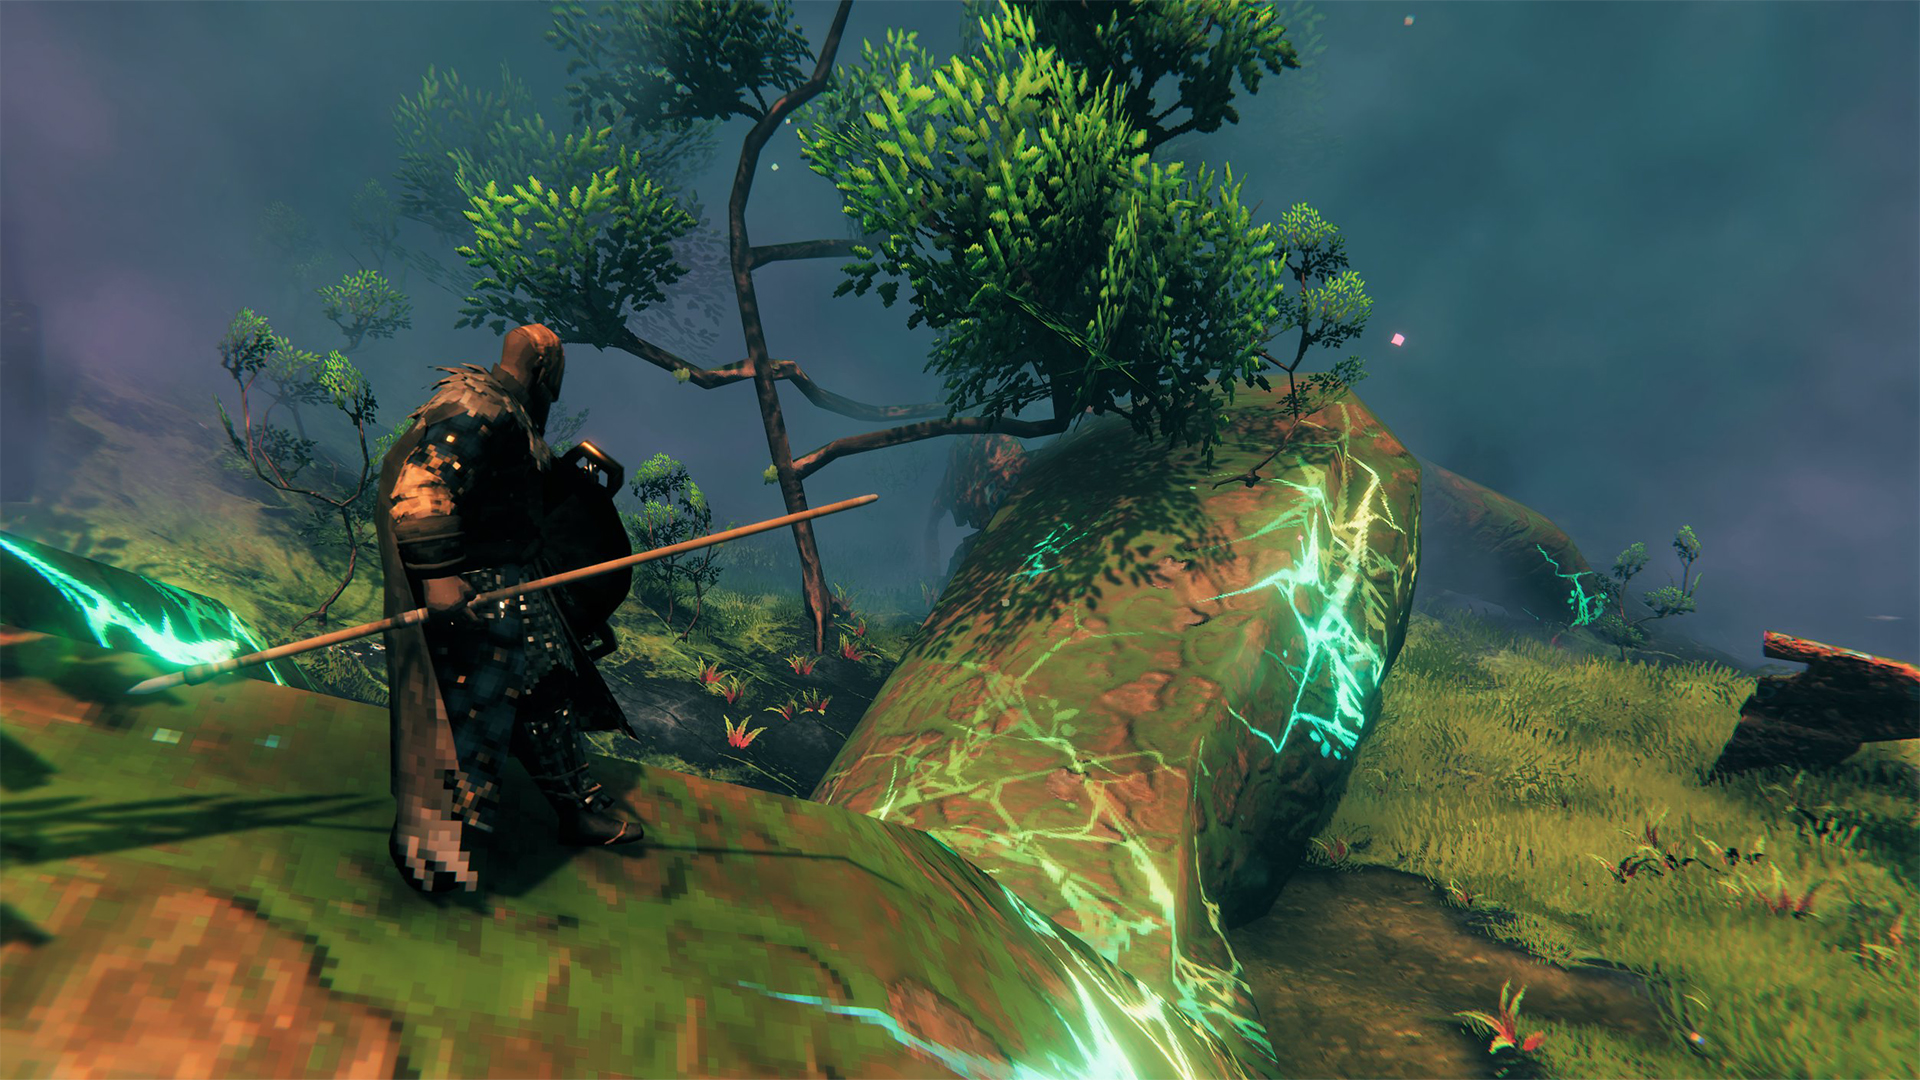 Valheim Mistlands teaser shows the game is branching in new directions